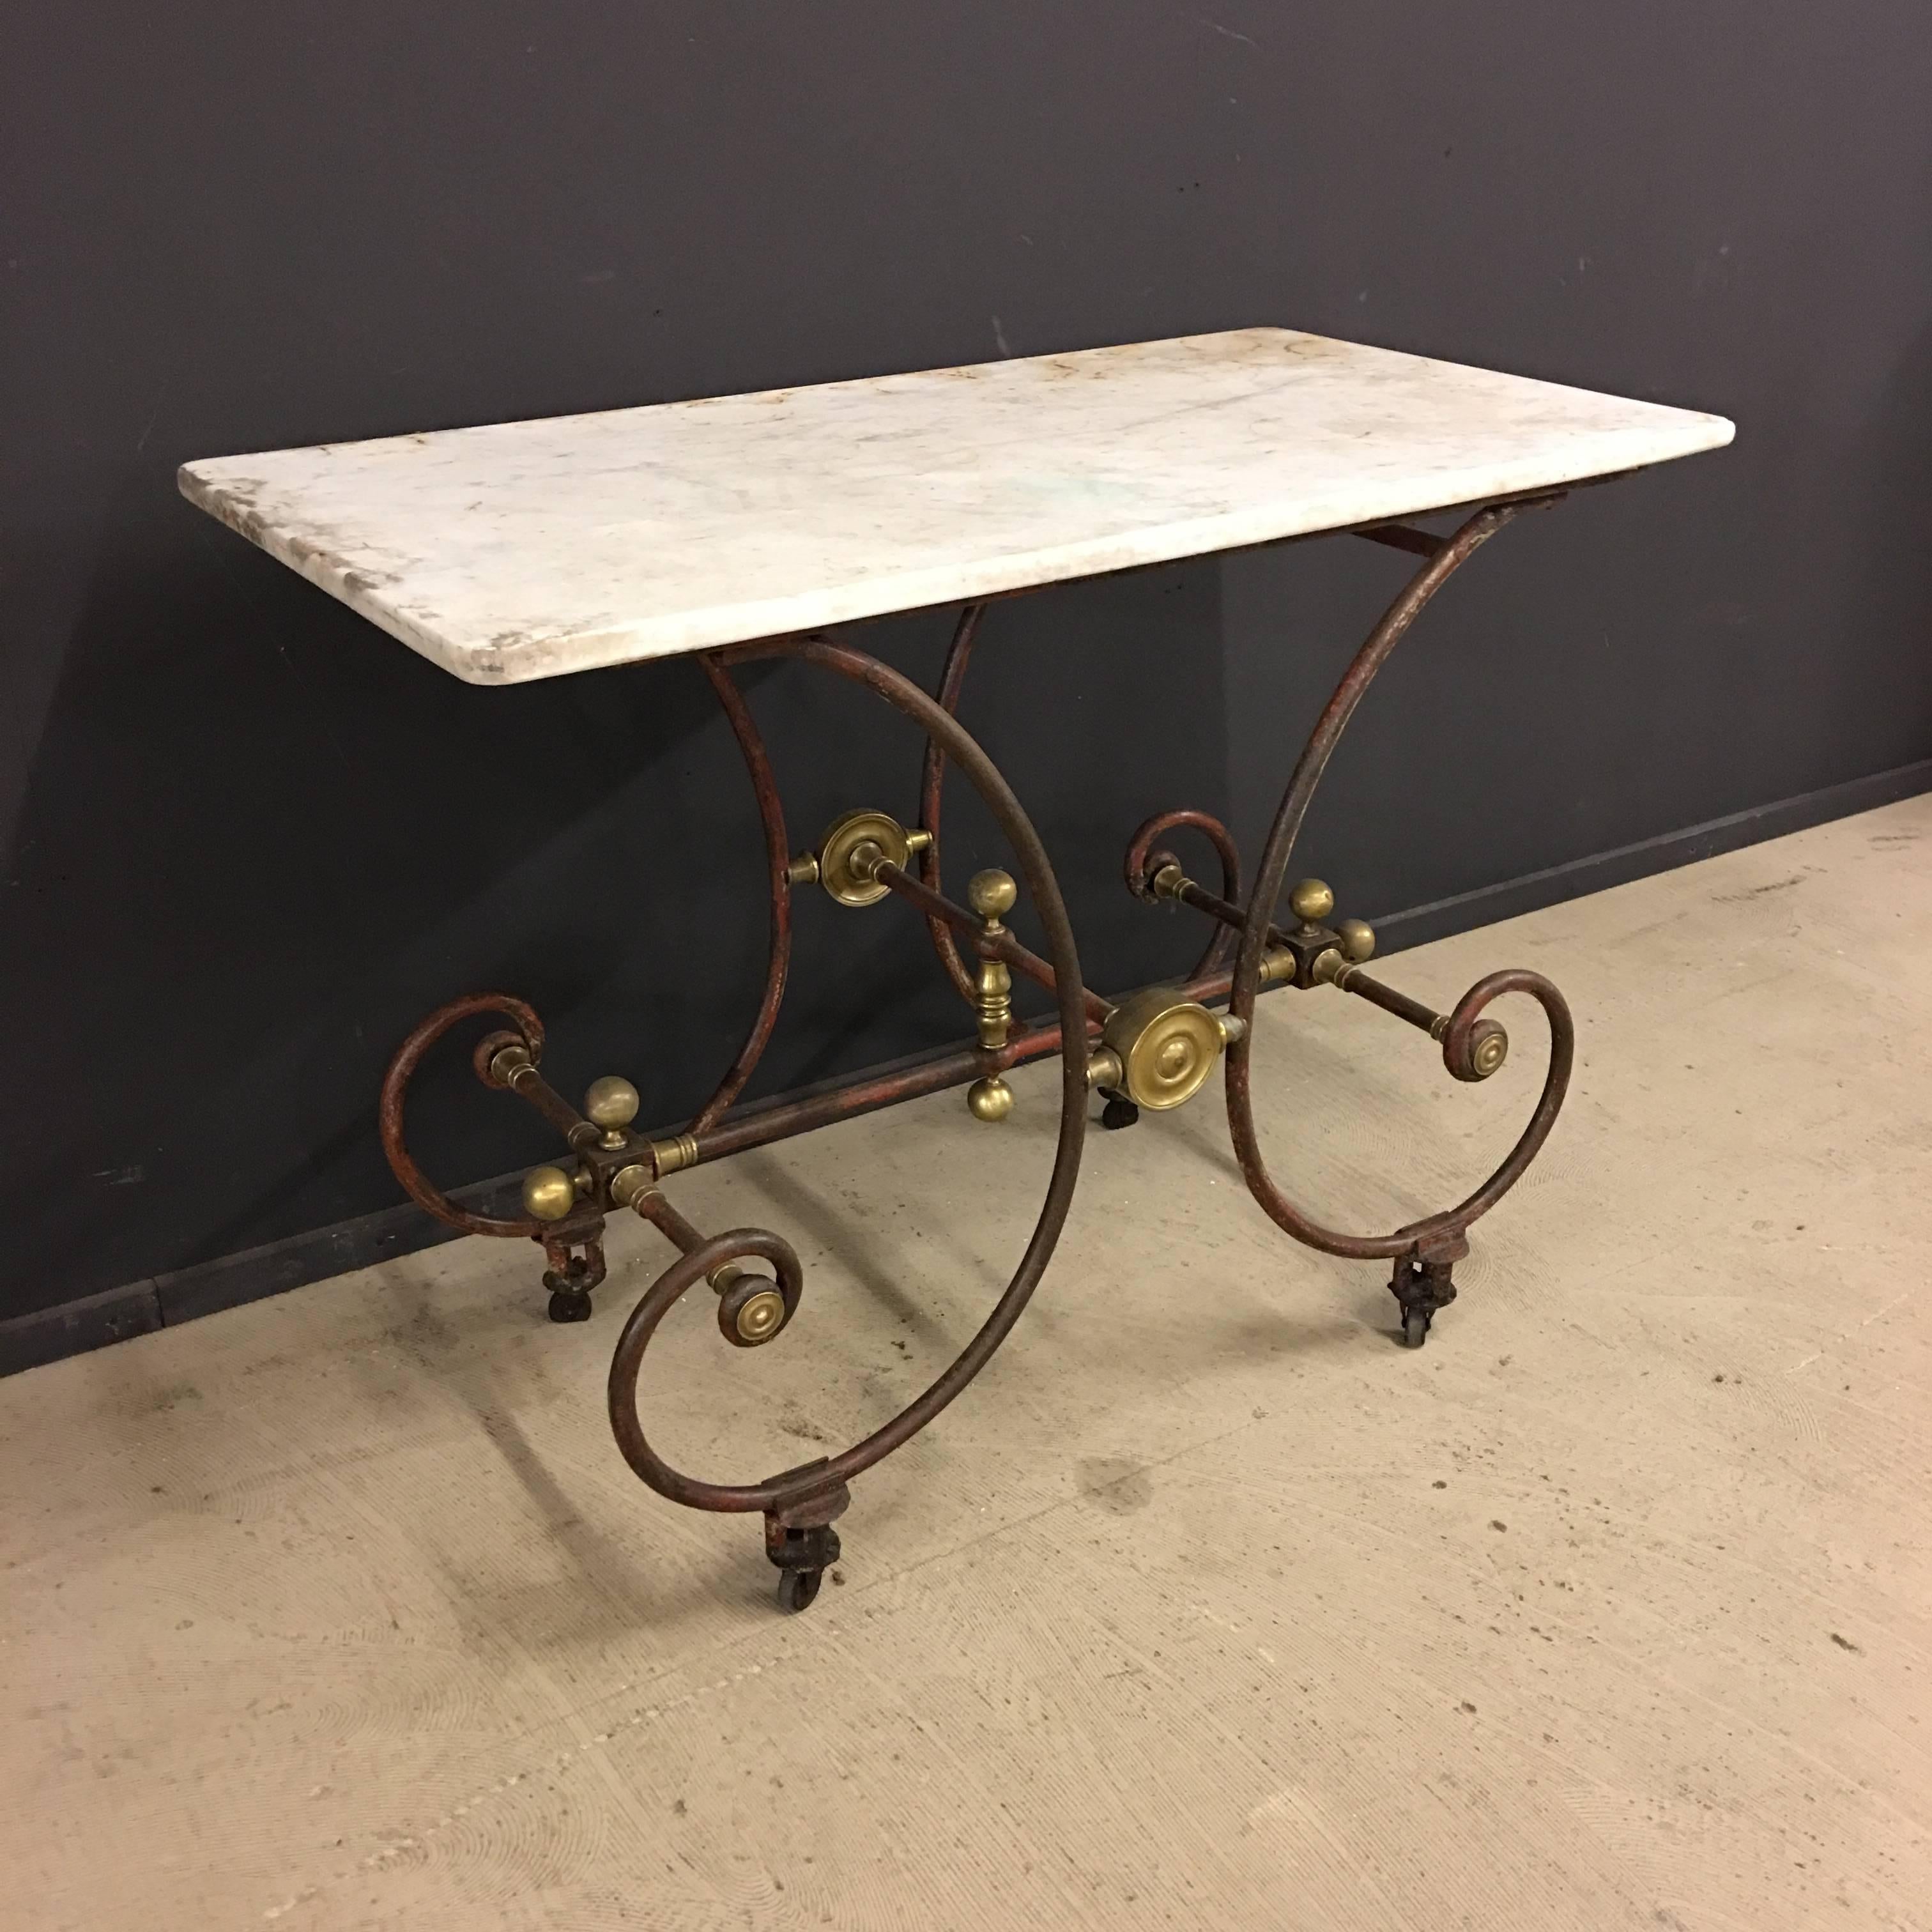 This antique French butchers table was manufactured by J. Mareschal, Paris, in the 19th century. It features a cast iron and wrought iron base with brass element and white marble table top with nice patina.